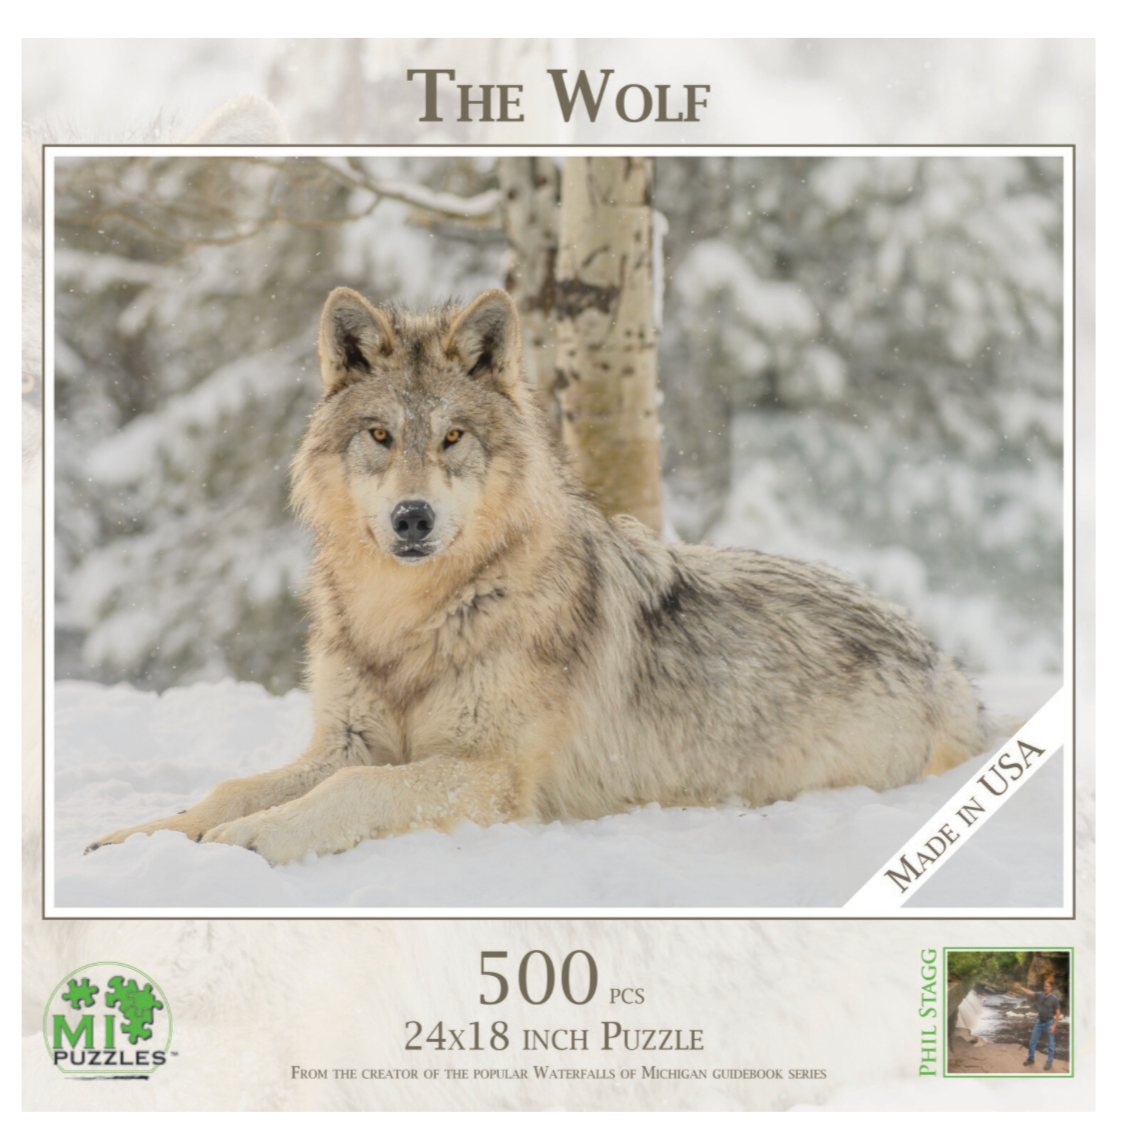 The Wolf 500 pc Jigsaw Puzzle